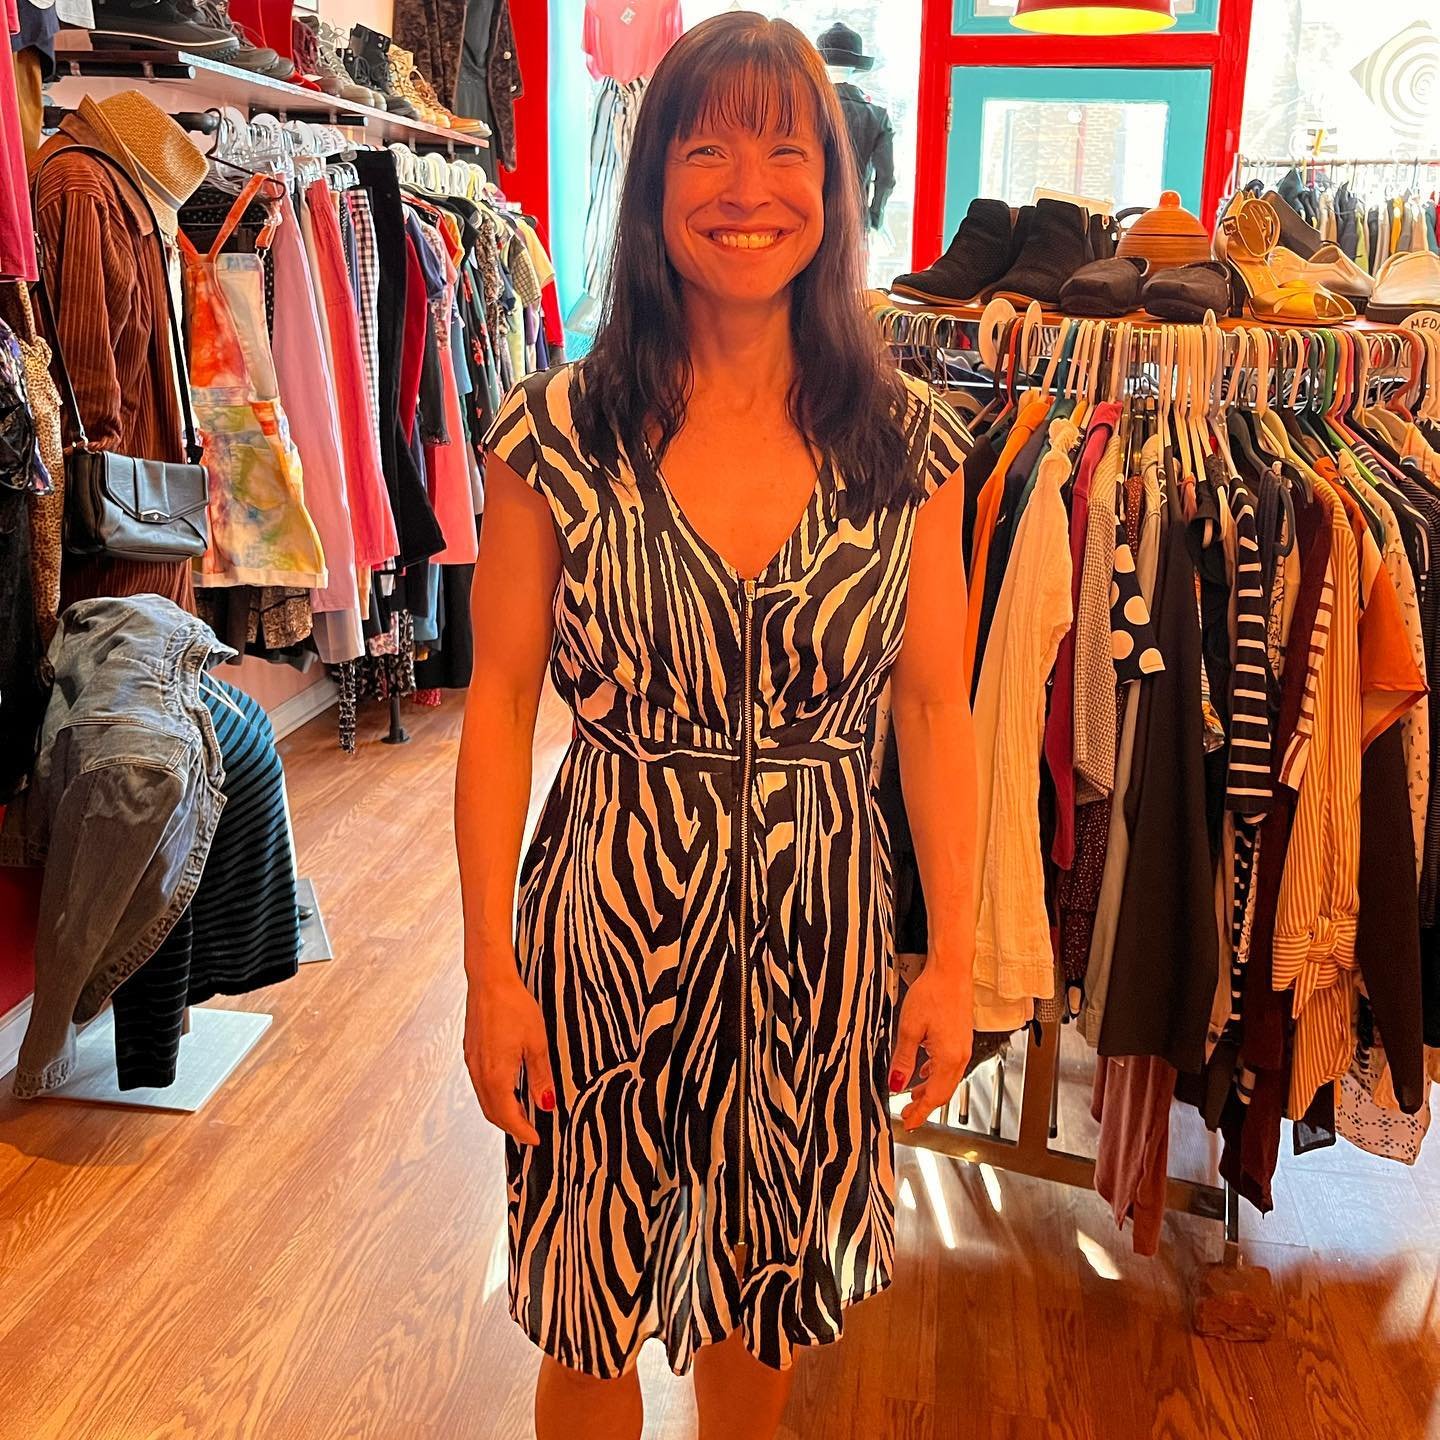 Happy Friday from Megan and a small adjustment to hours today! Open 2-6! Don&rsquo;t forget tonight is the first @merchantvillemarketoffcentre! ✌️
.
.
.
#secondhand #shopmerchantville #peak #peaking #secondhandclothes #secondhandfashion #selflove #fi